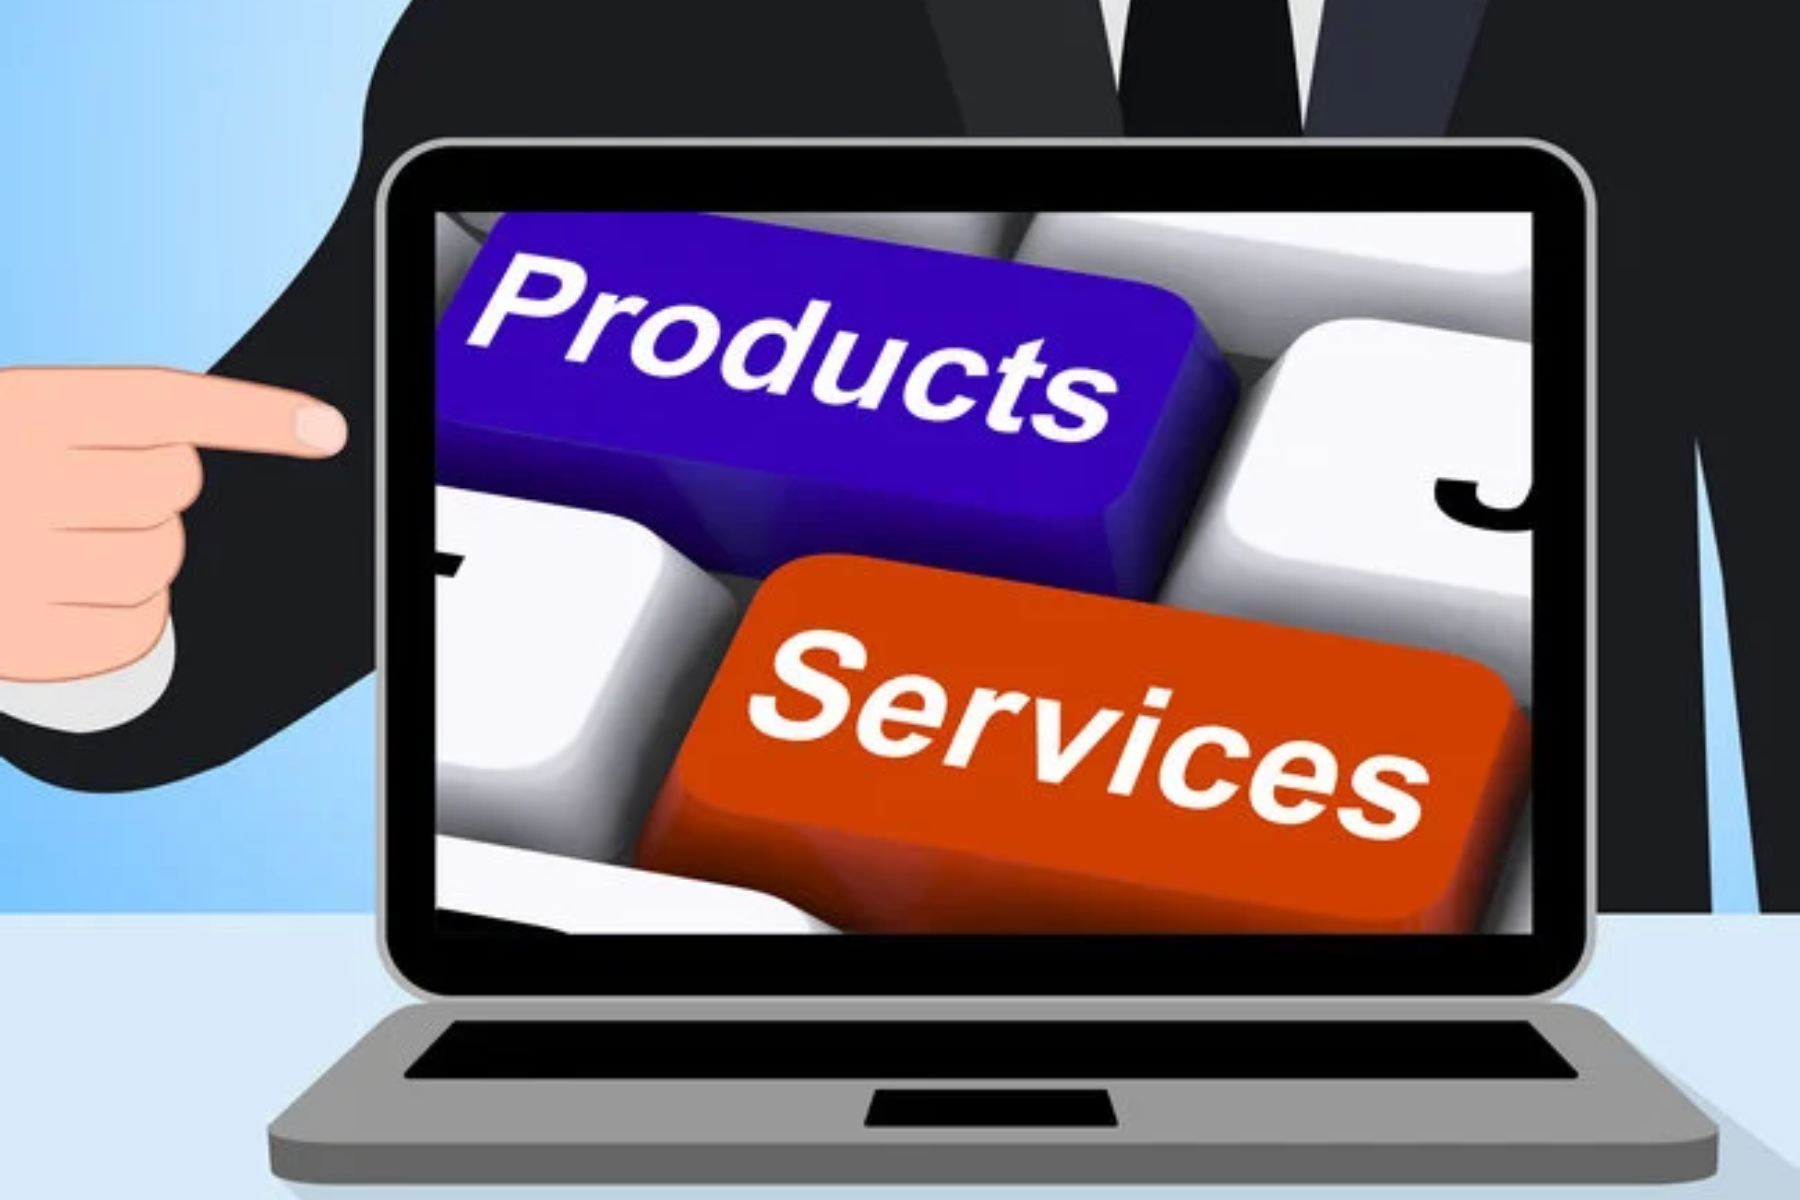 A businessman's finger points to a laptop screen with "Products" and "Services" buttons